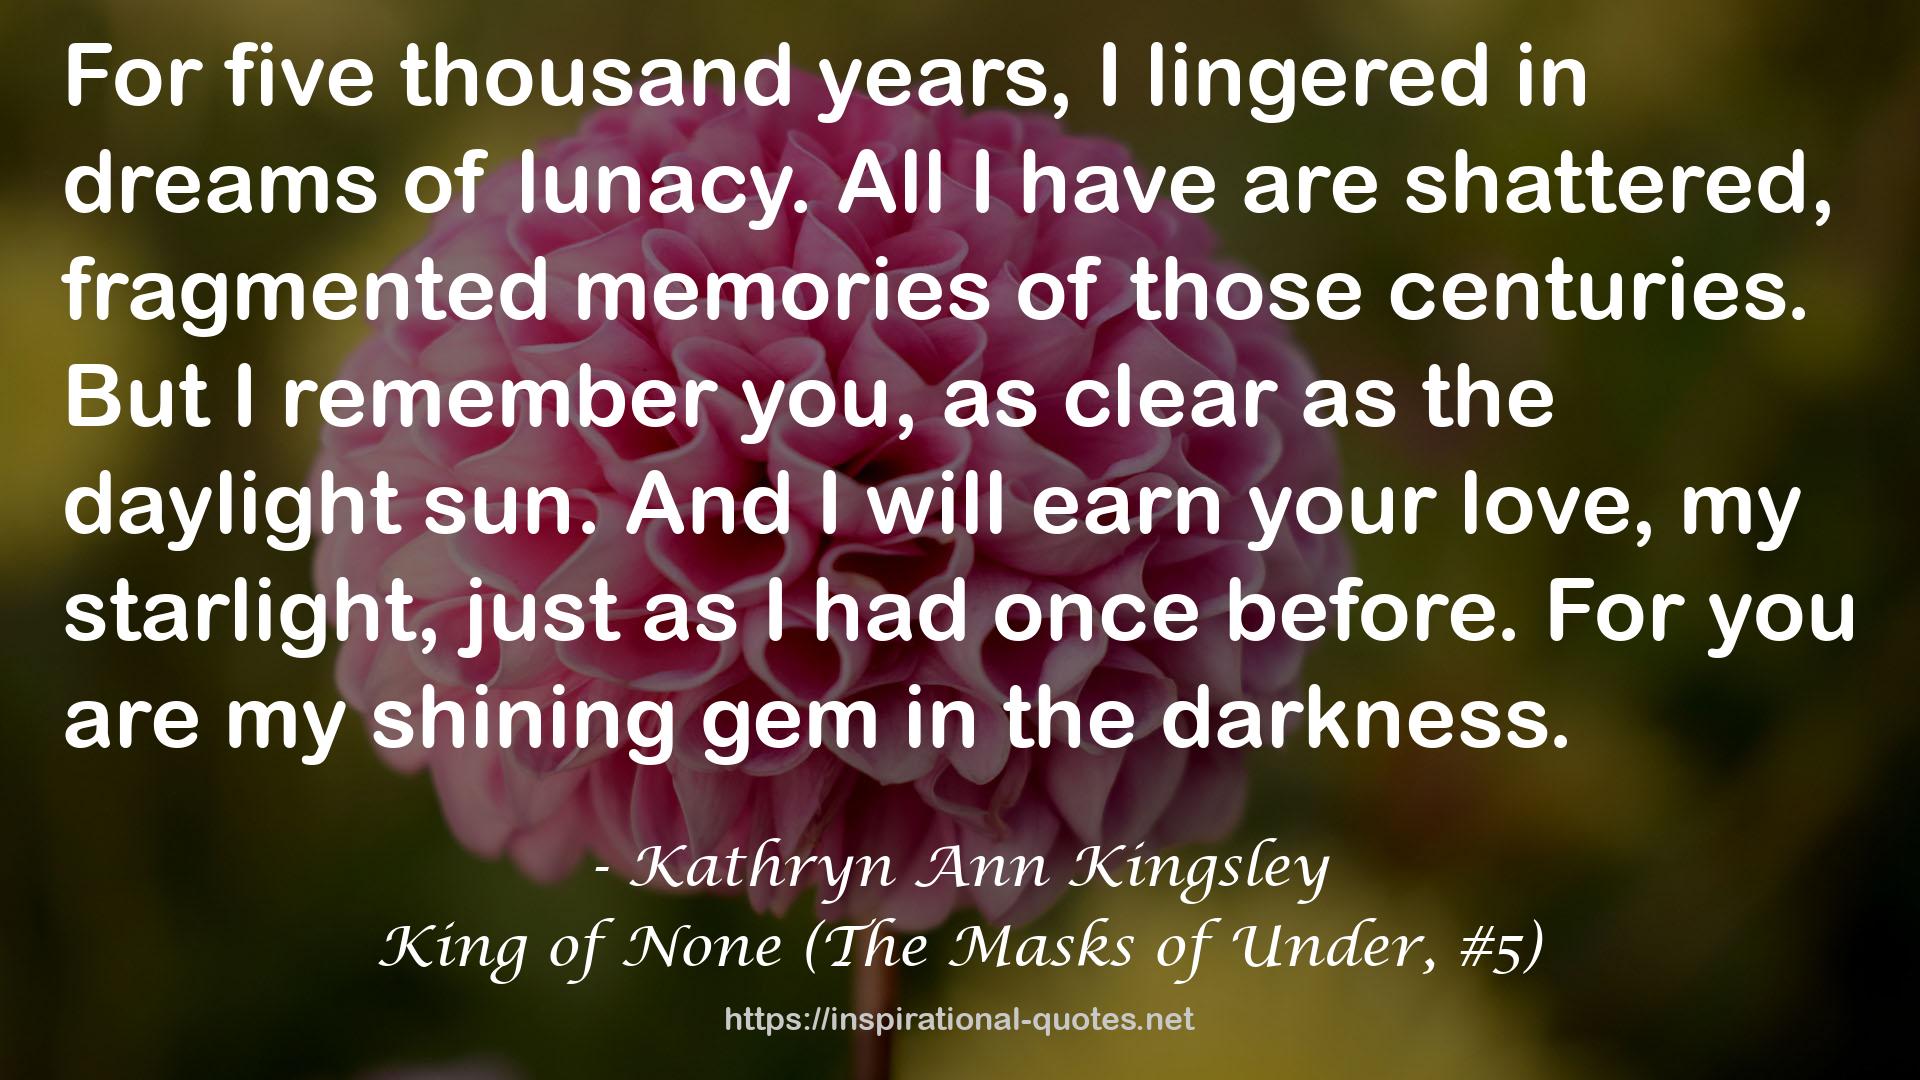 King of None (The Masks of Under, #5) QUOTES